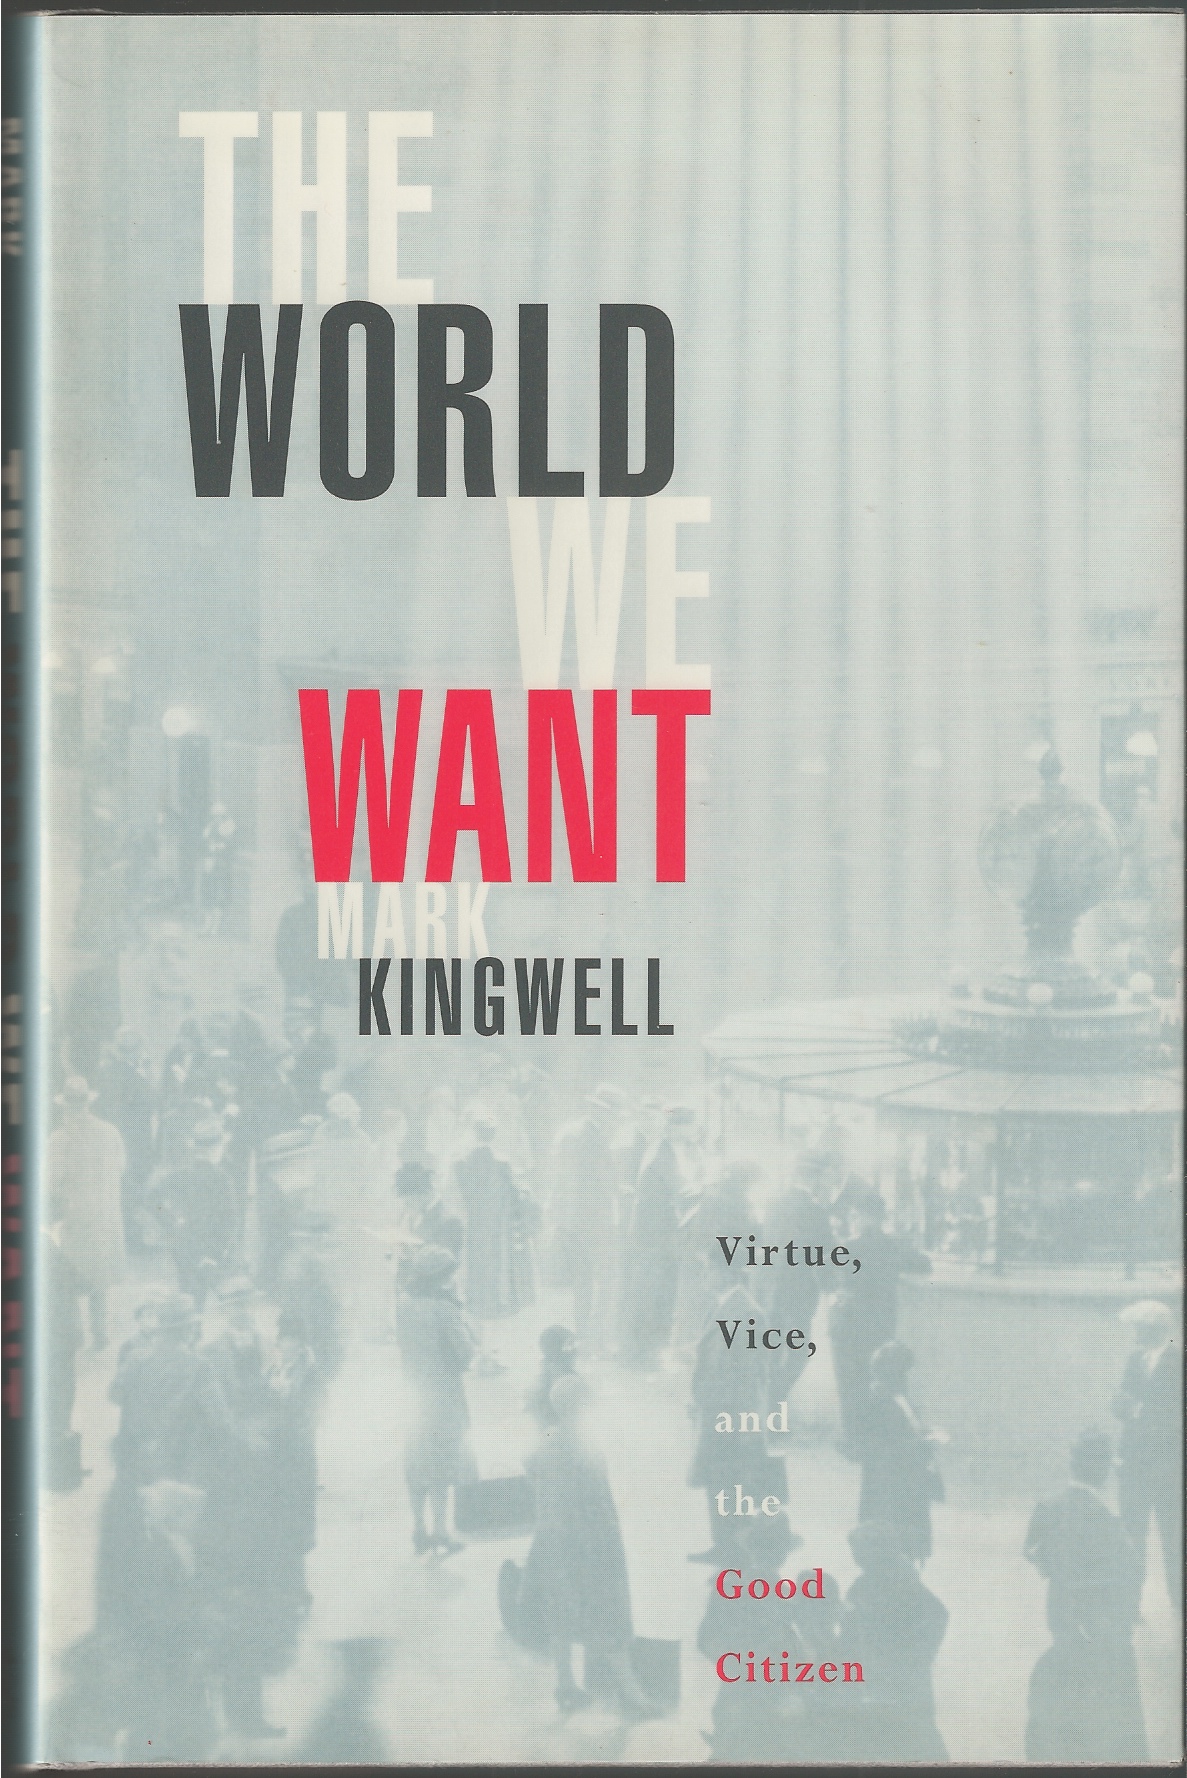 KINGWELL MARK - World We Want, the Virtue, Vice and the Good Citizen